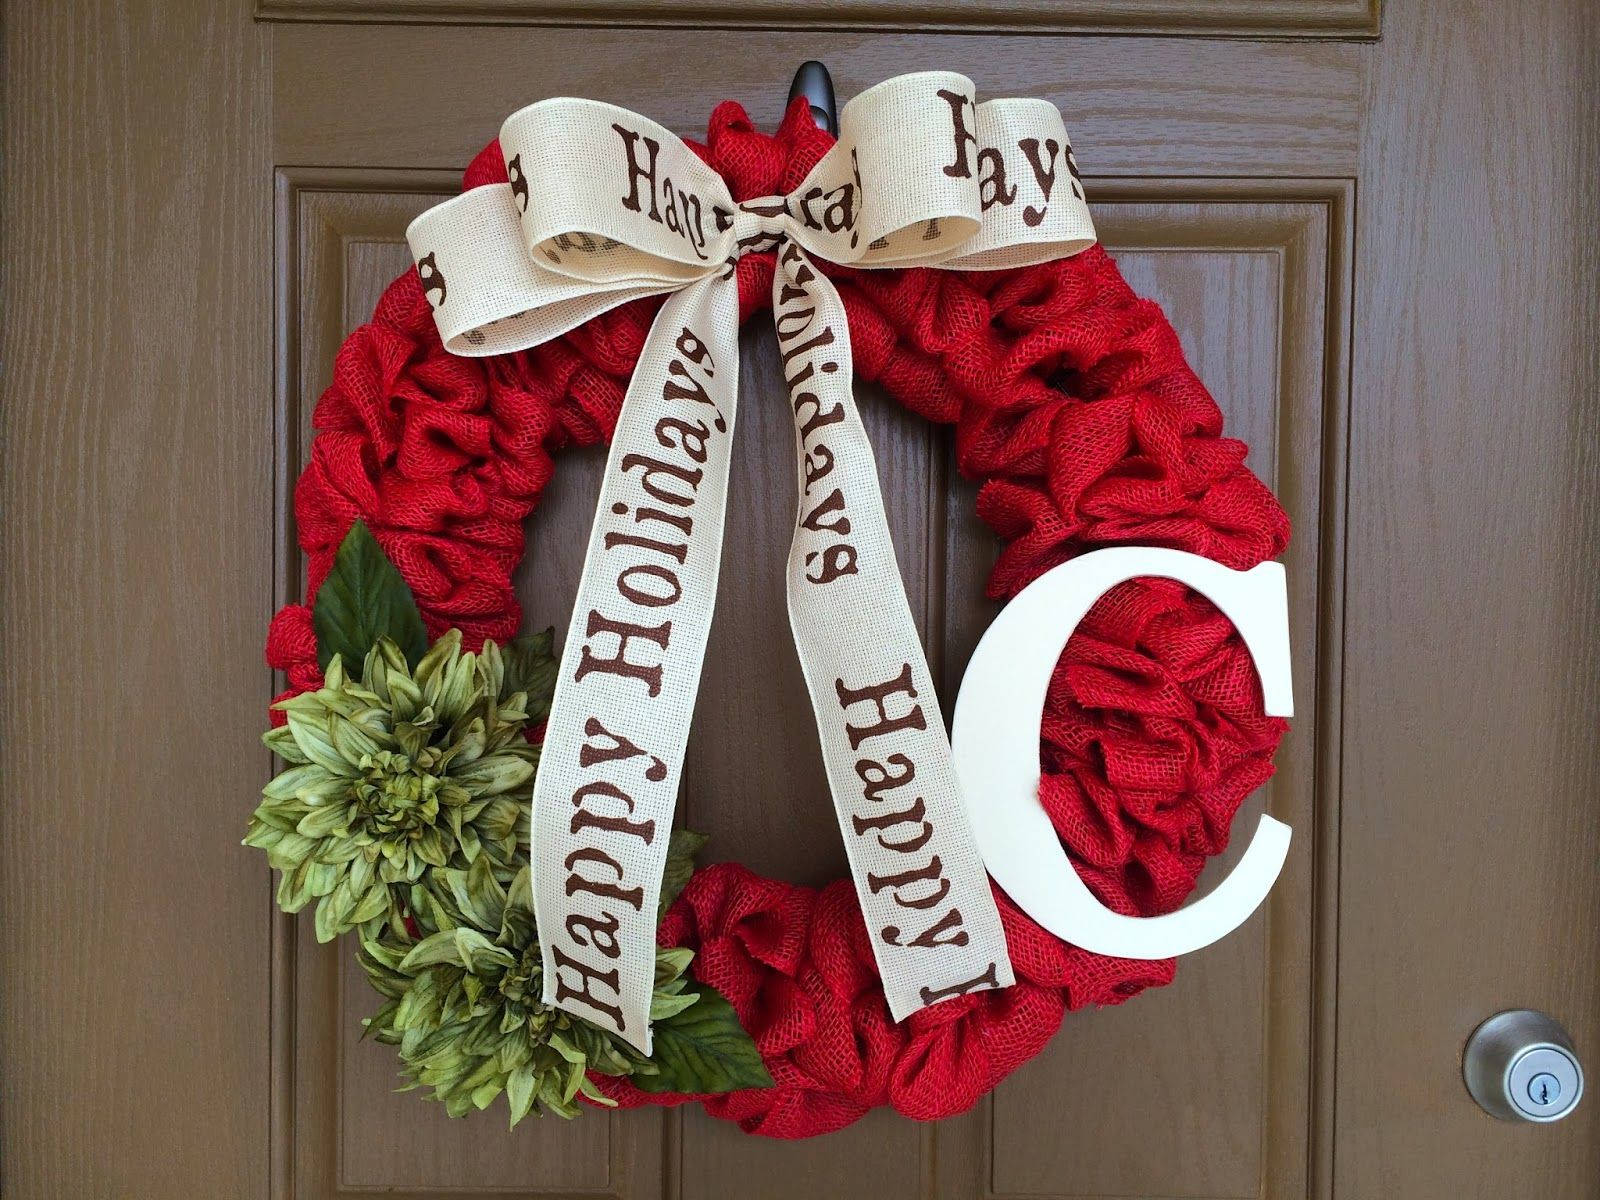 Festive Christmas Wreath With Red Berries